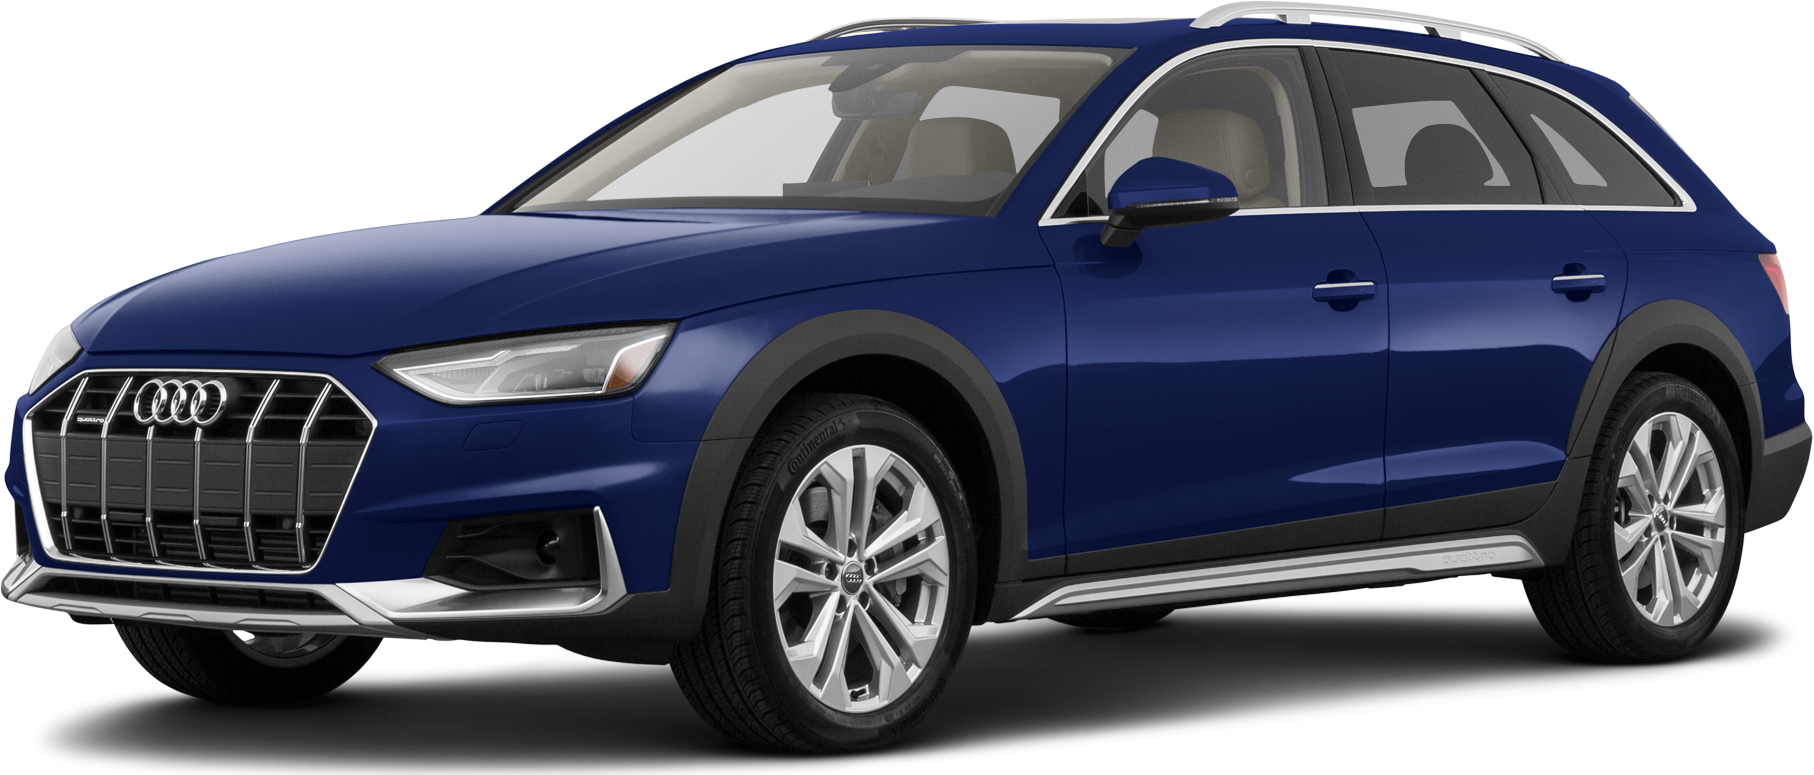 2020 Audi A6 Price, Value, Ratings & Reviews